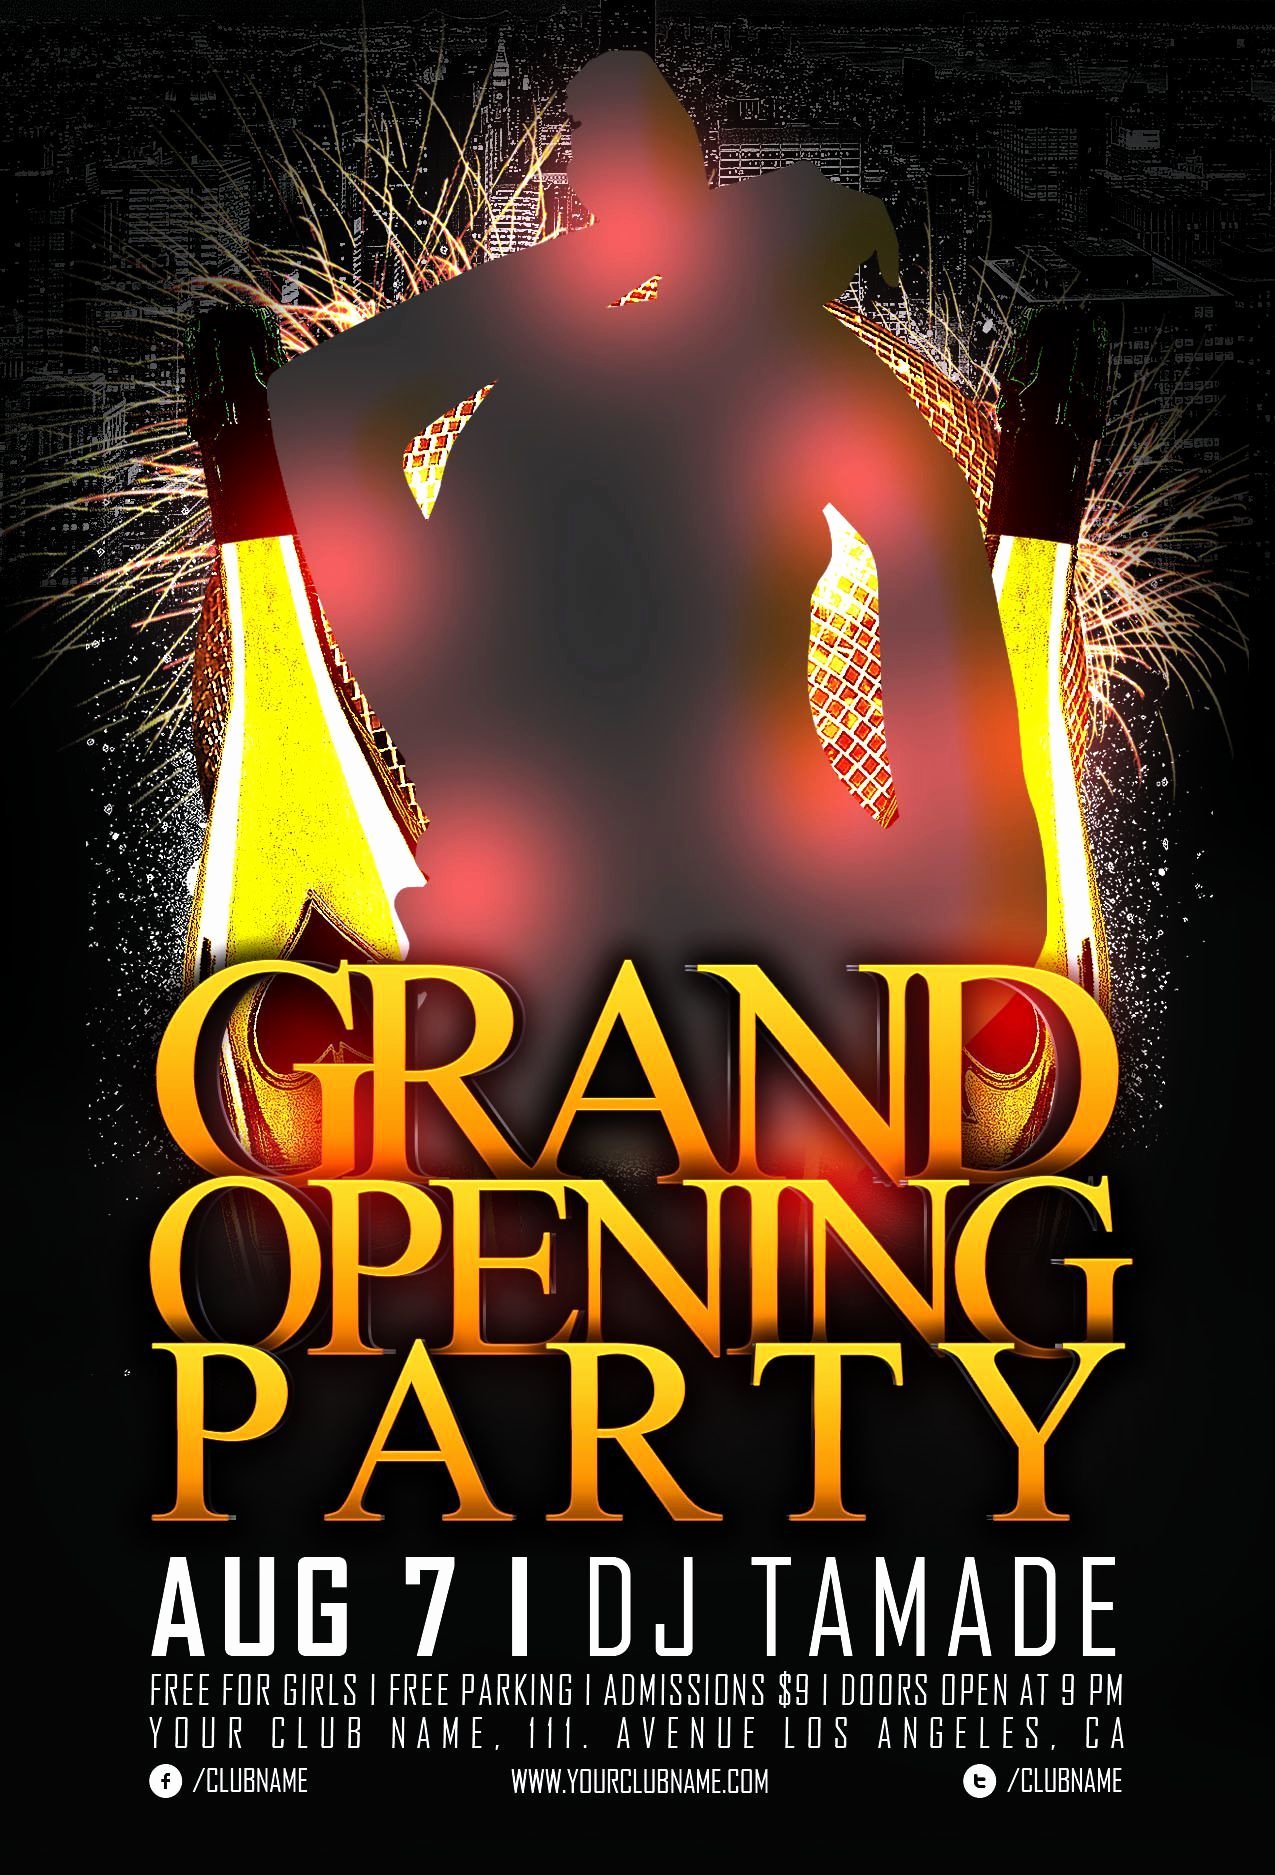 Grand Opening Flyer Template Best Of 20 Grand Opening Flyer Templates Free Demplates